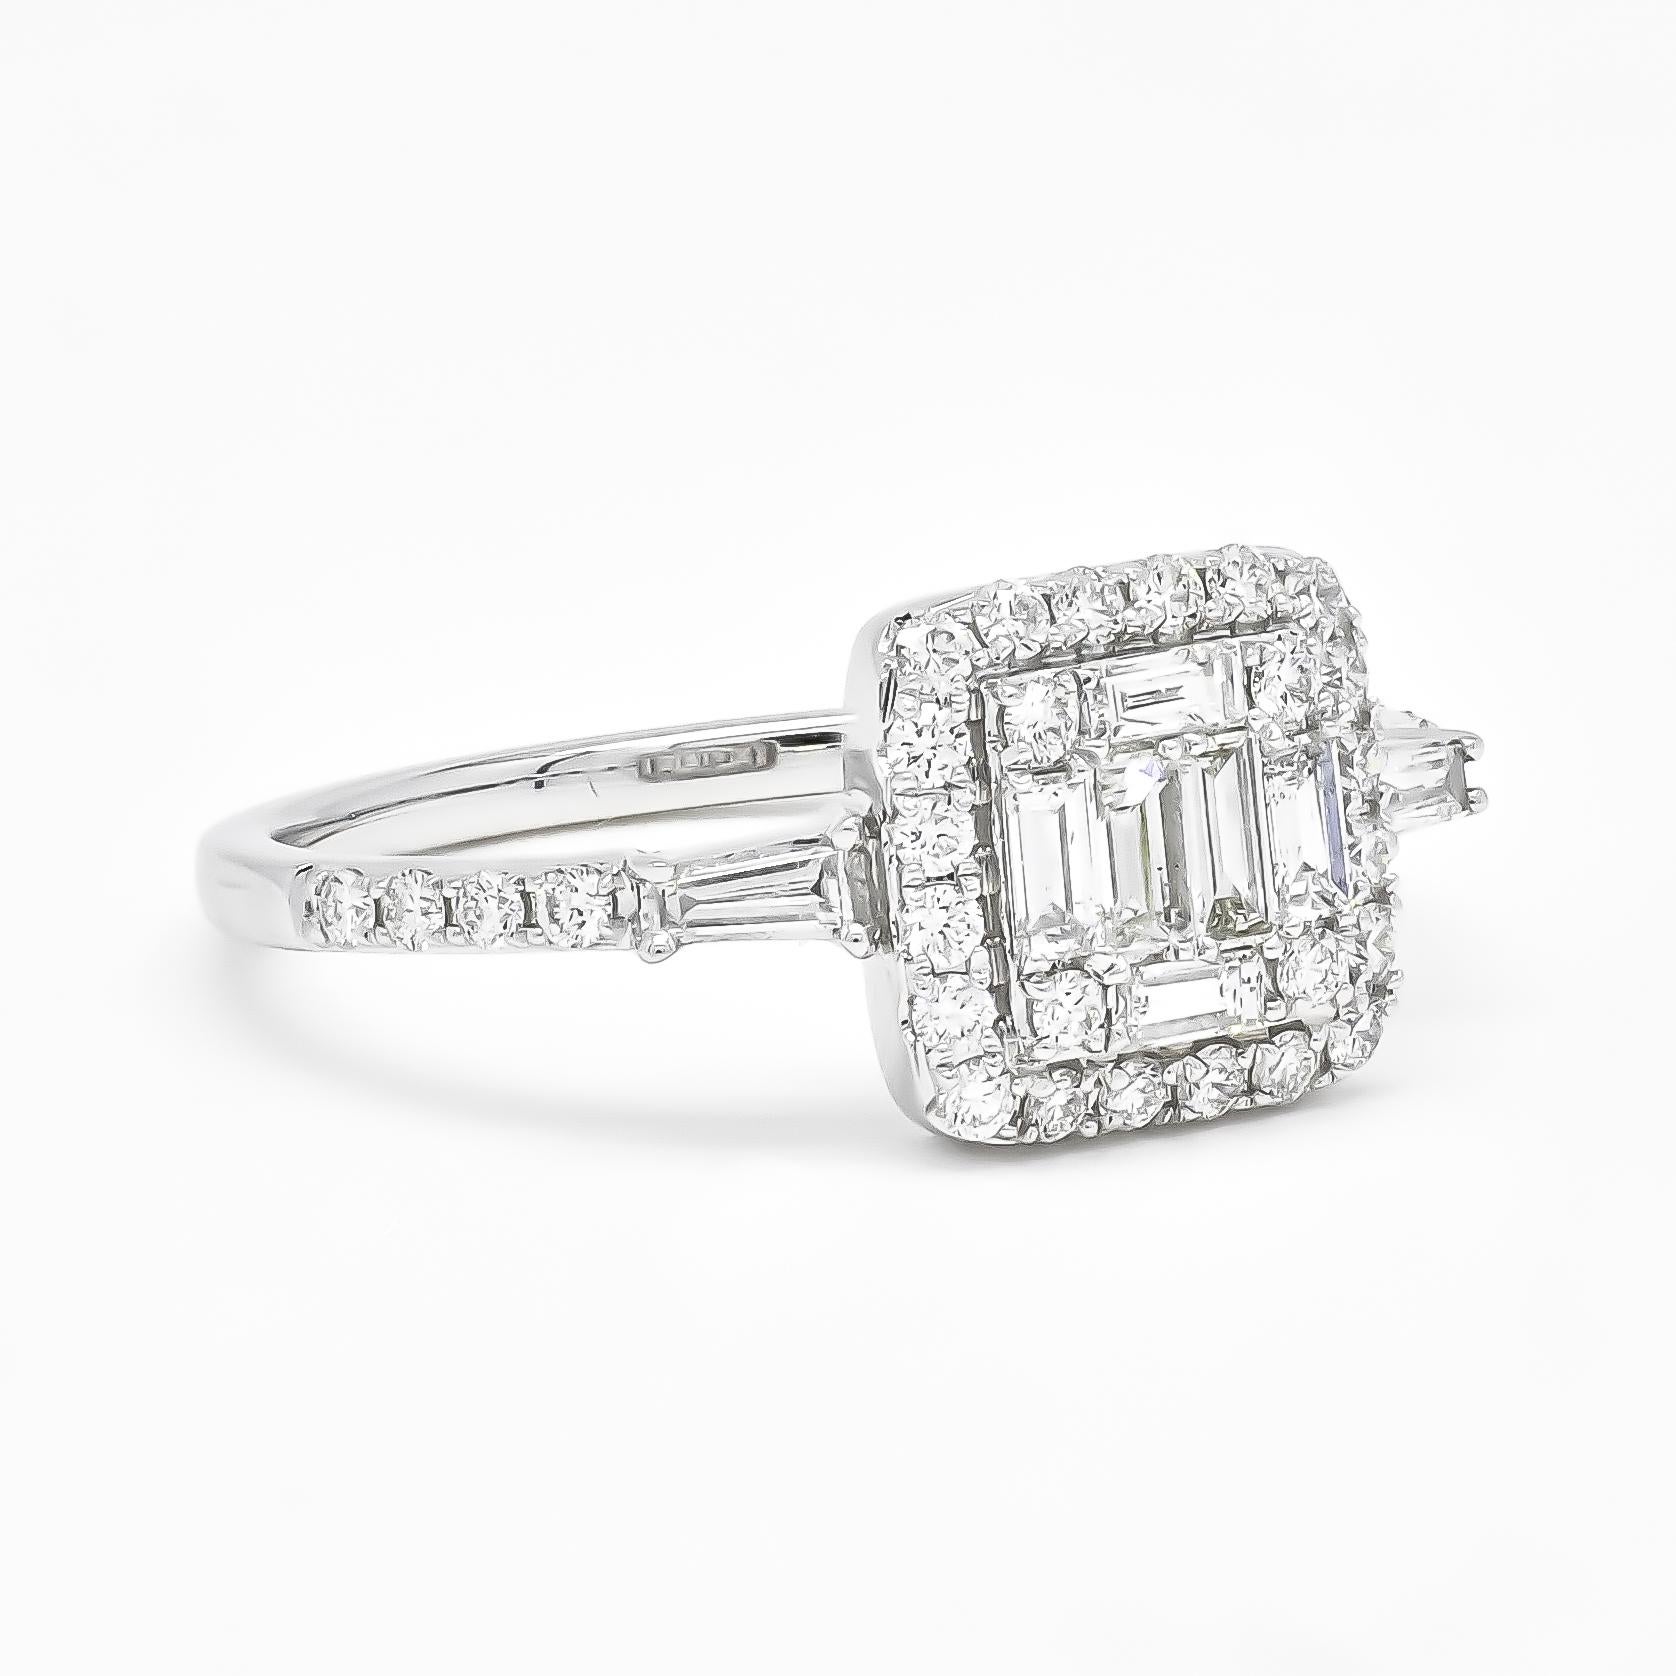 Dazzle and drama come together in this stunning diamond halo cluster engagement ring set with skill and craftsmanship in 18k white gold.

The unique sheen of diamond baguettes is showcased in this beautiful engagement ring, designed in white gold